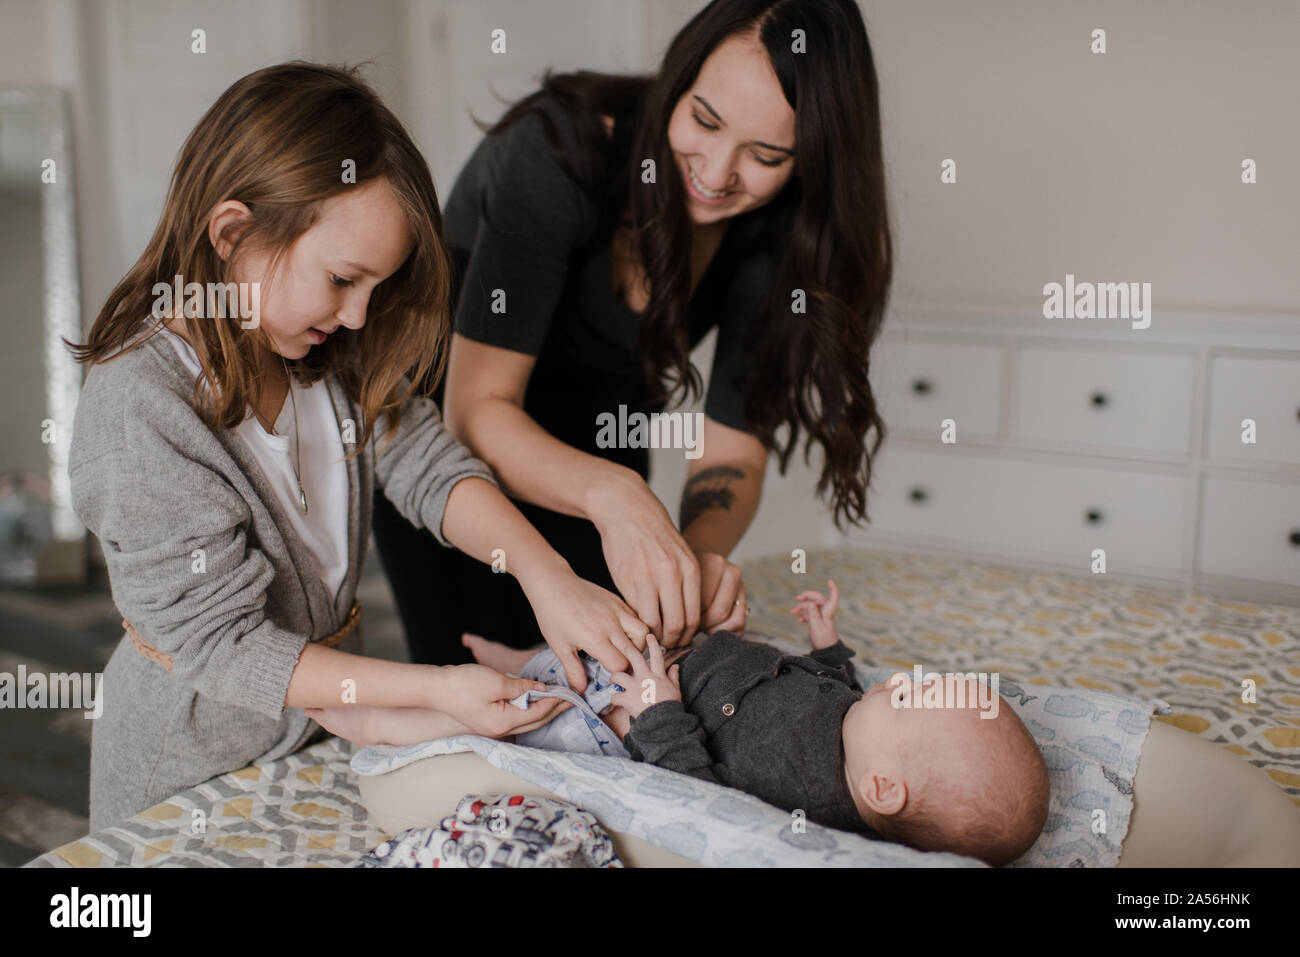 Girl helping mother change baby brother's diaper on bed Stock Photo